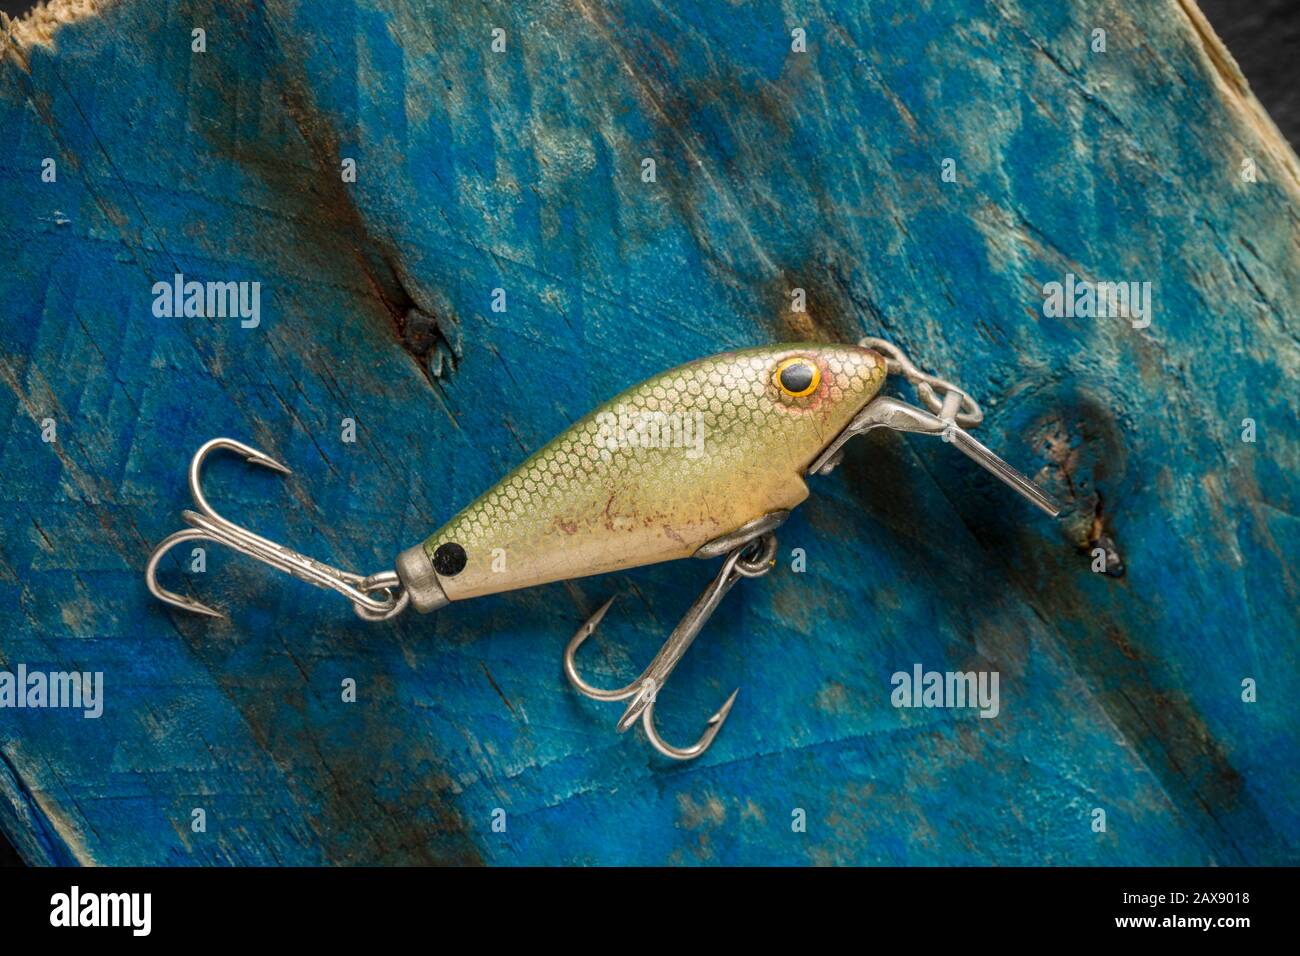 https://c8.alamy.com/comp/2AX9018/an-old-fishing-lure-or-plug-equipped-with-treble-hooks-designed-to-catch-predatory-fish-the-lure-has-possibly-been-made-by-woods-mfg-but-this-cann-2AX9018.jpg